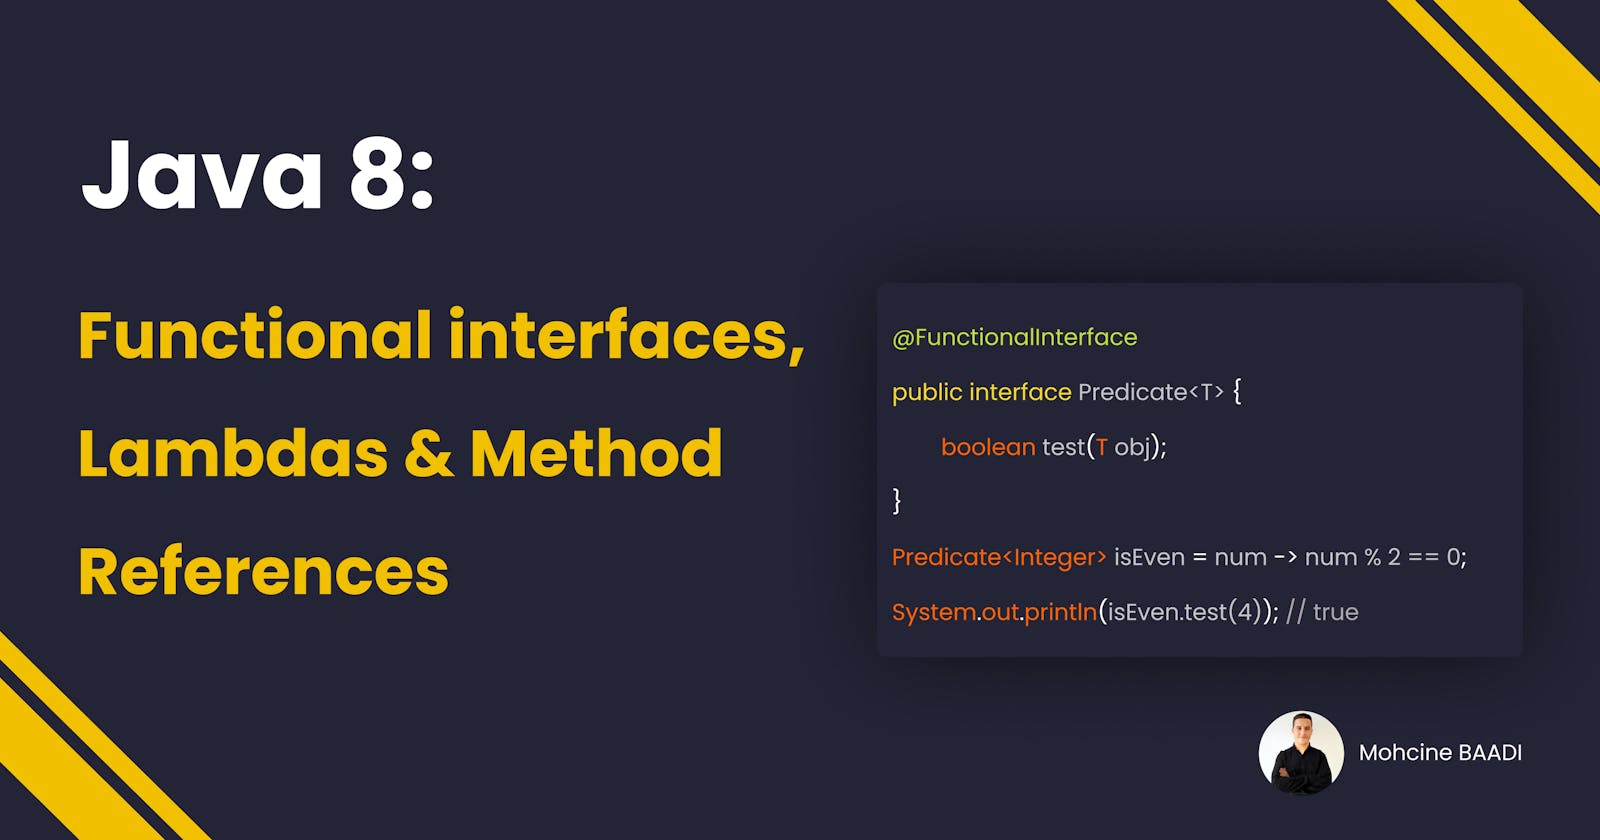 Java 8: Functional interfaces, Lambdas, and Method References